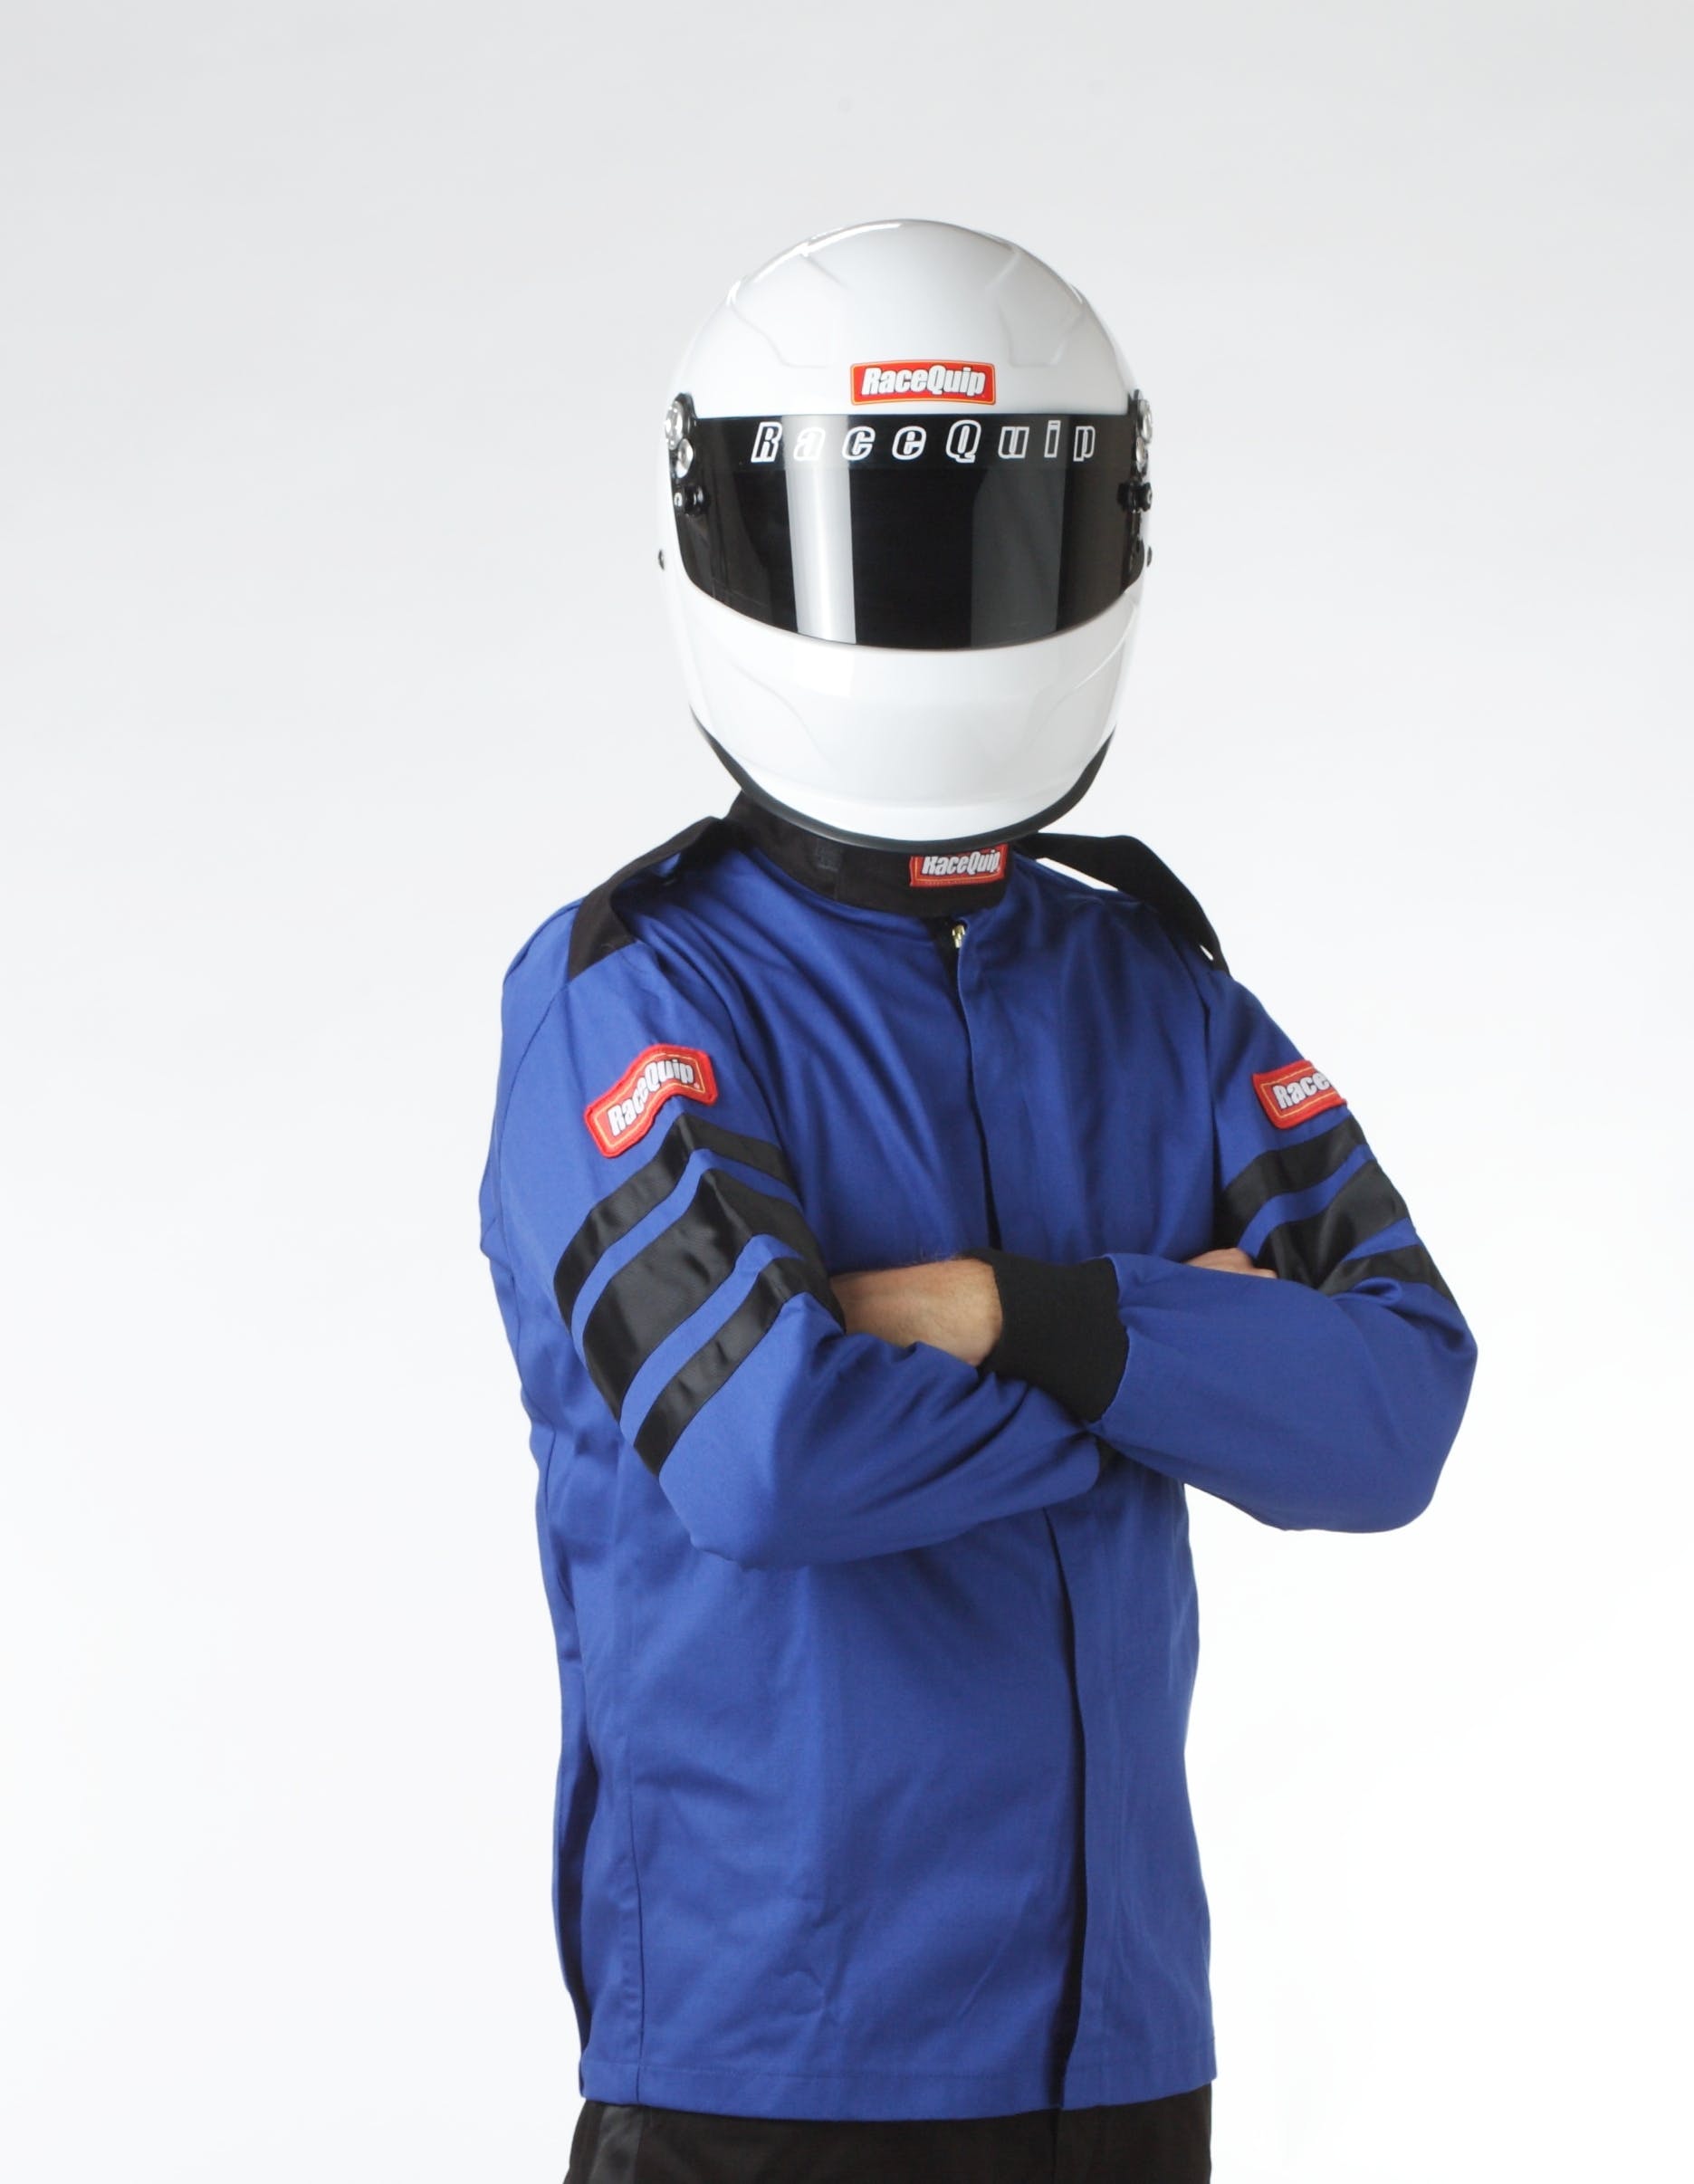 RaceQuip 111022 SFI-1 Pyrovatex Single-Layer Racing Fire Jacket (Blue, Small)